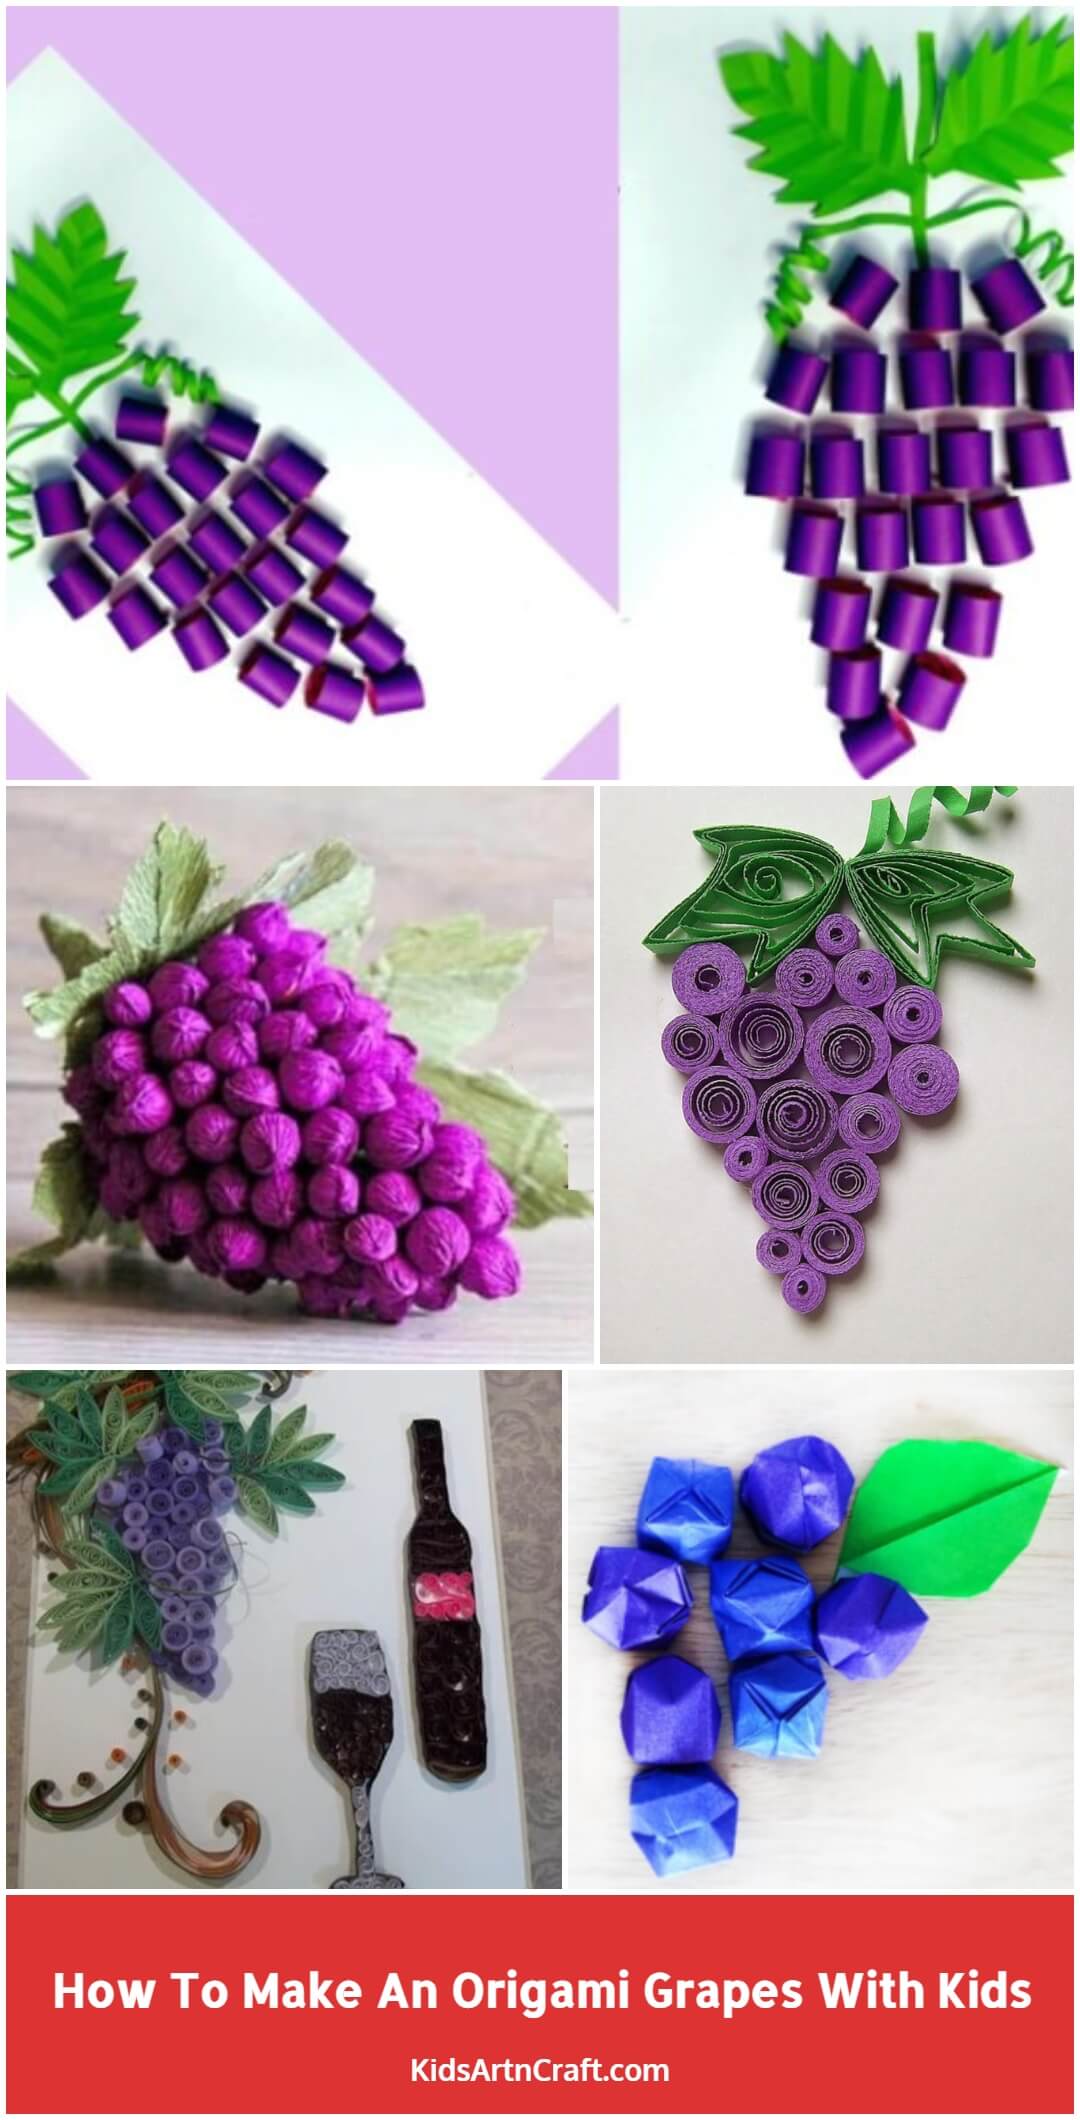 How To Make An Origami Grapes With Kids